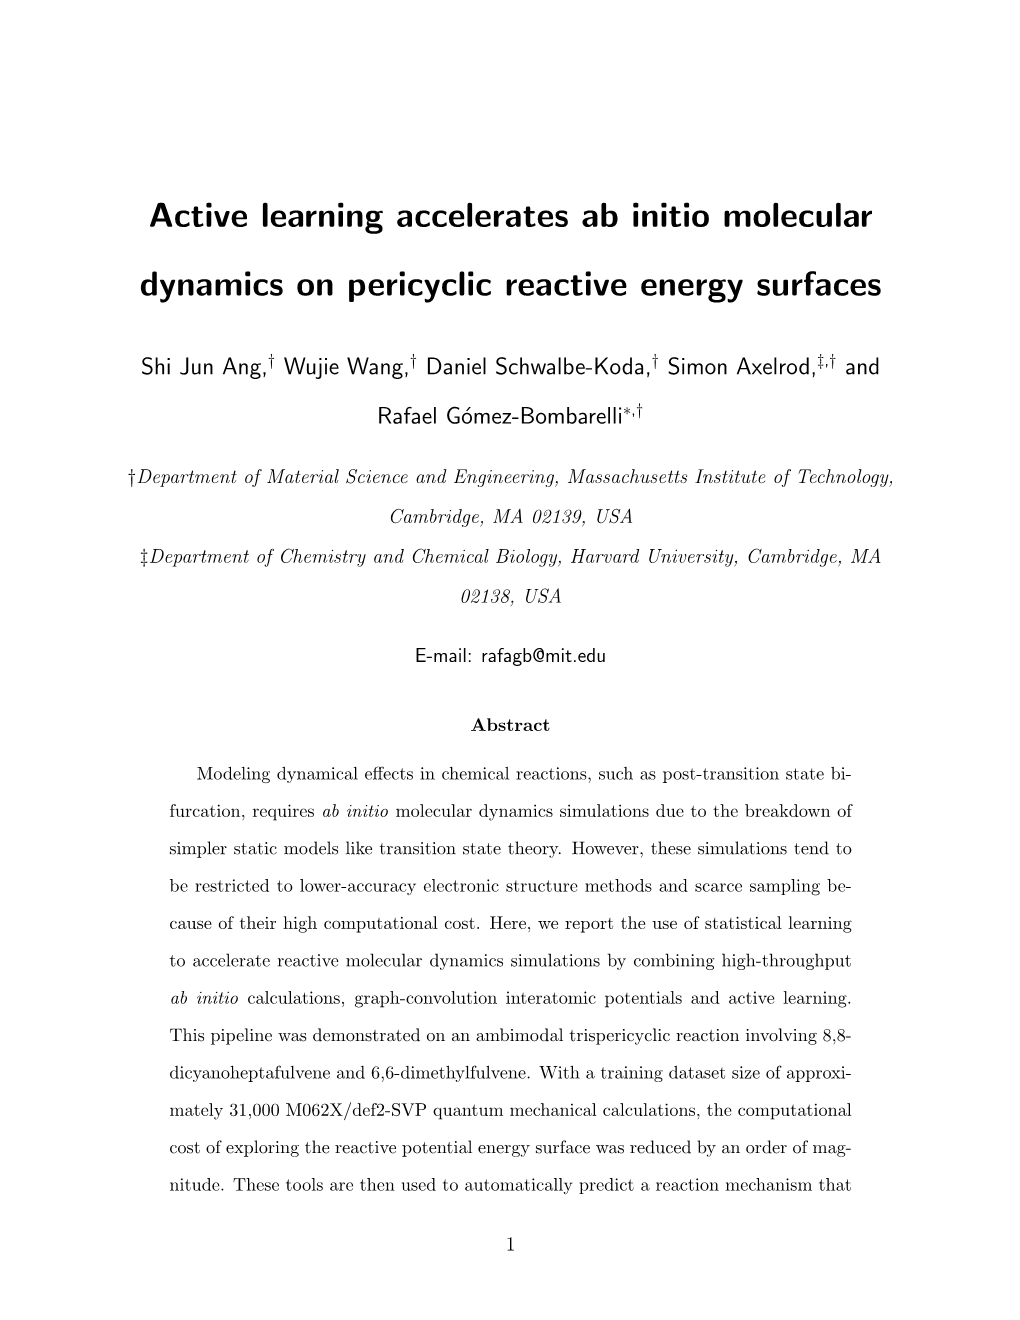 Active Learning Accelerates Ab Initio Molecular Dynamics on Pericyclic Reactive Energy Surfaces